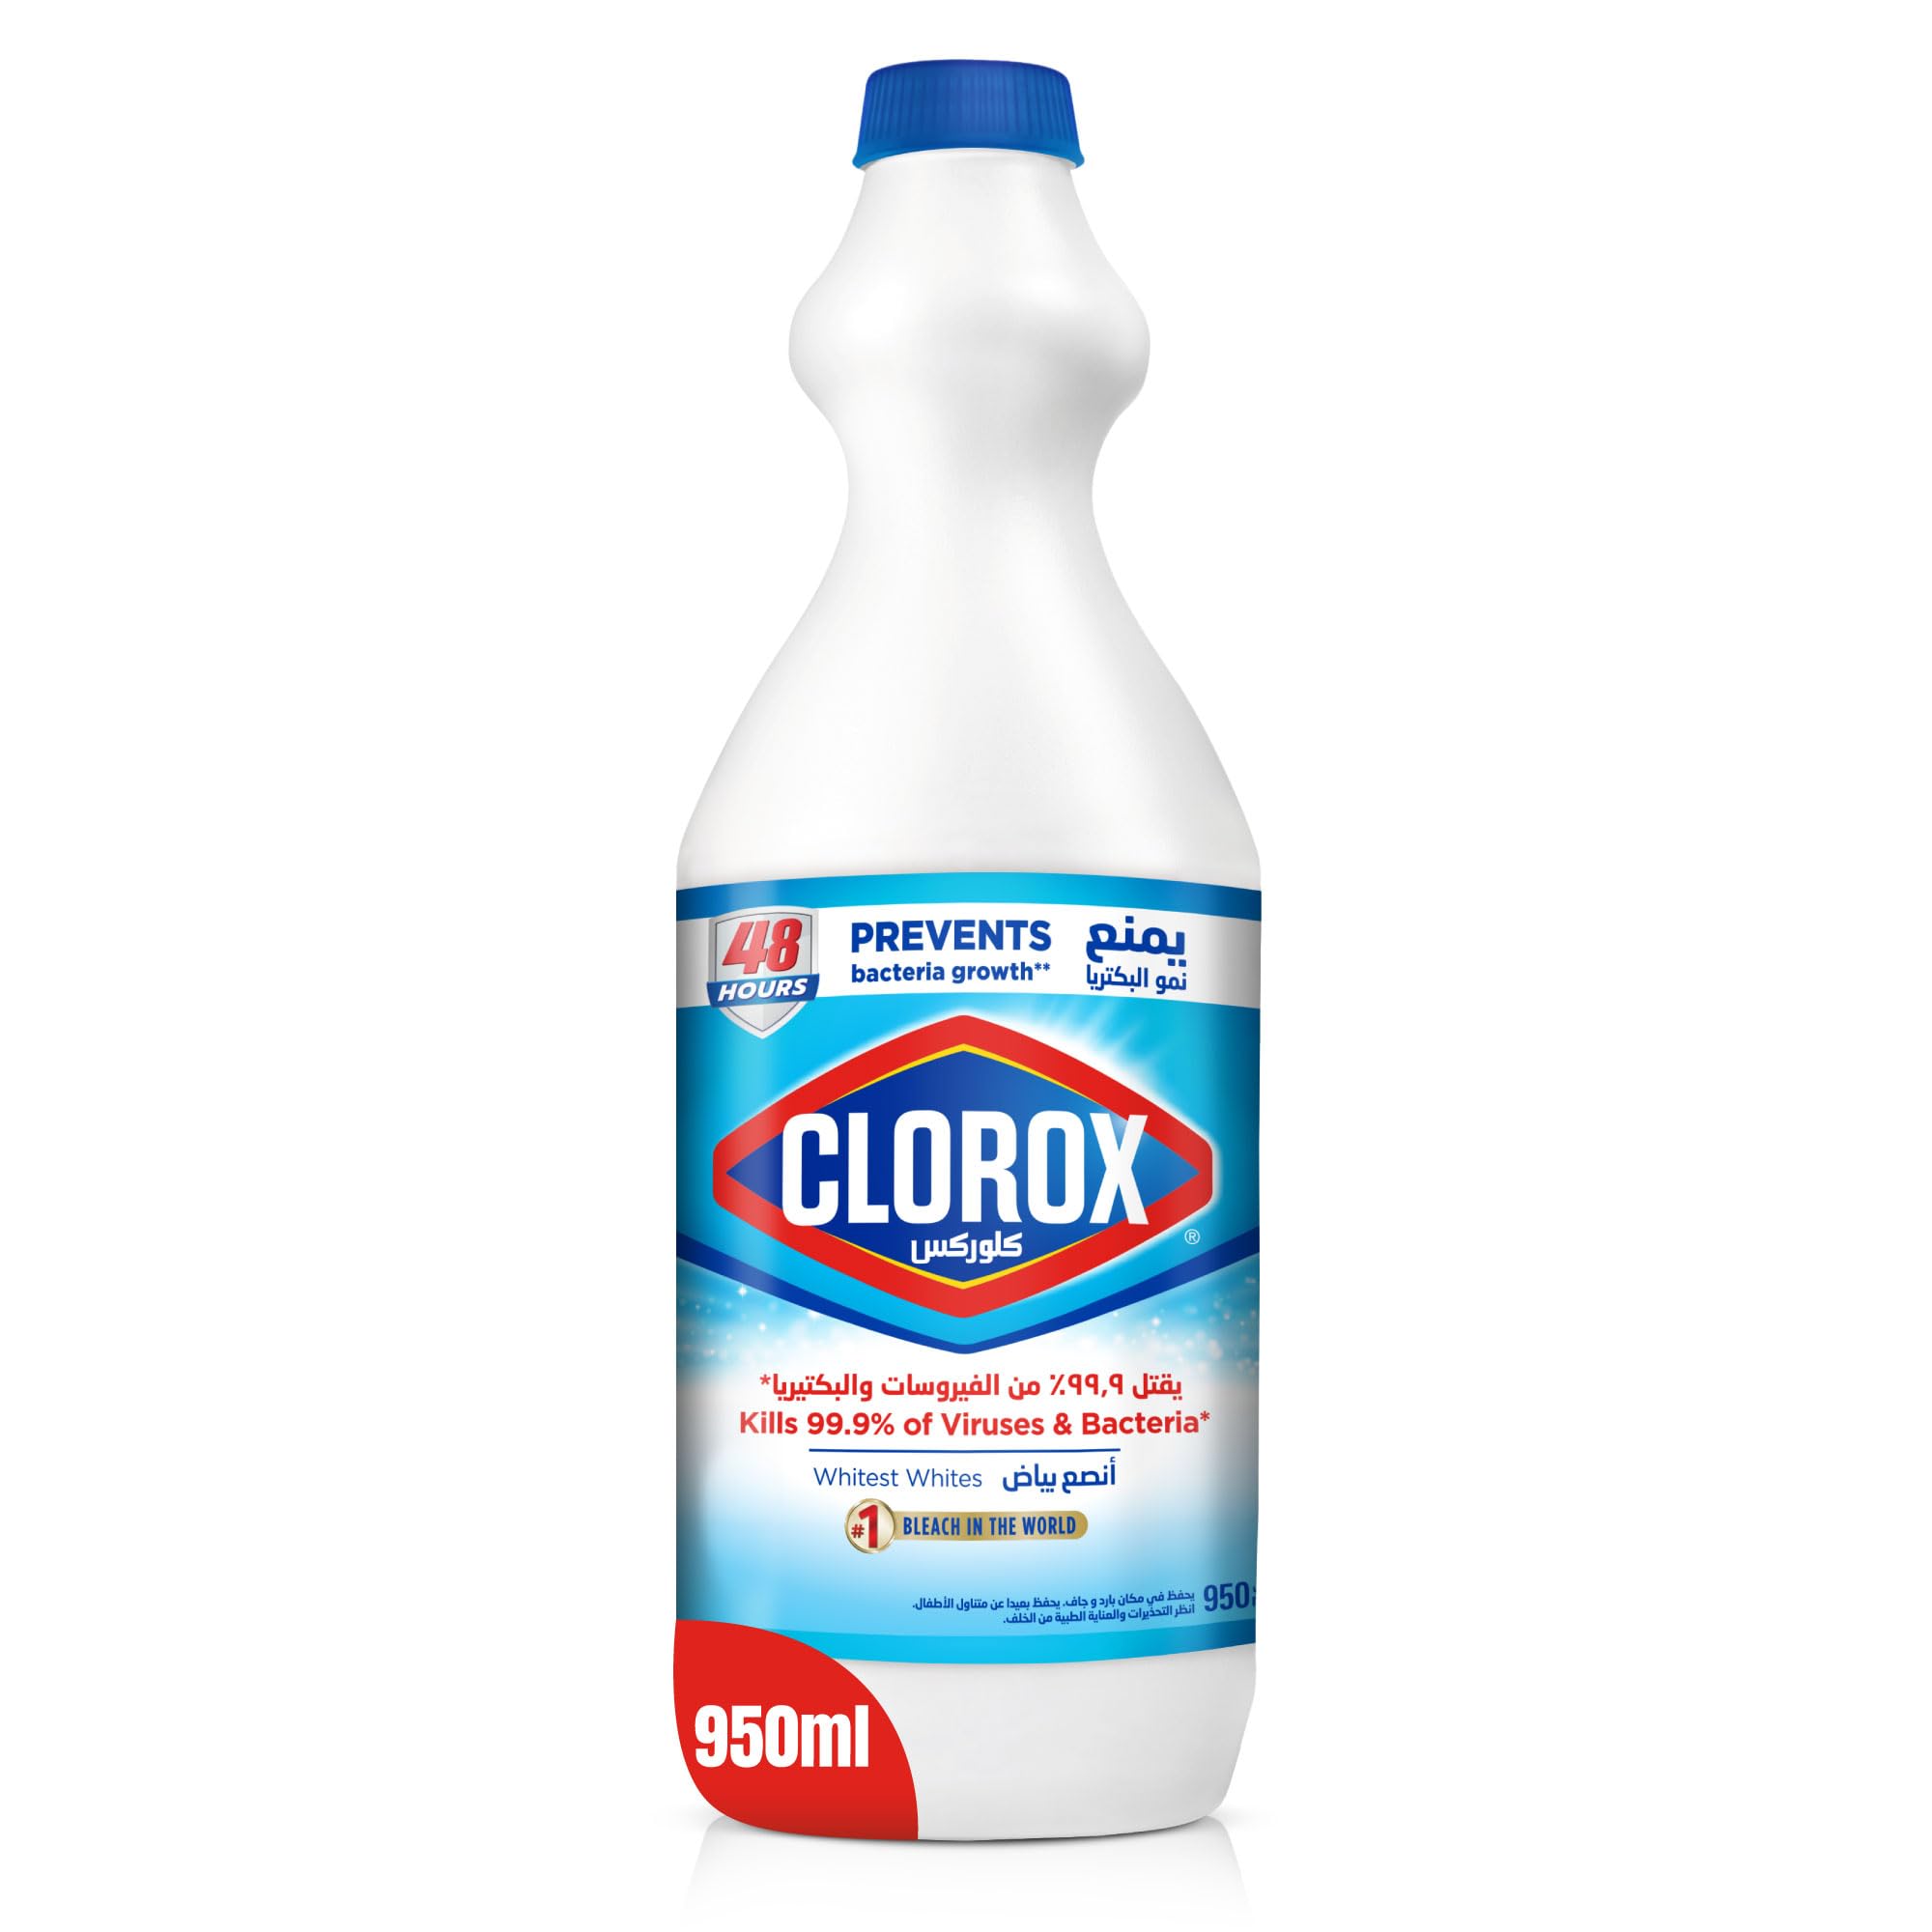 Clorox Liquid Bleach 950ml, Kills 99.9% of Viruses and Bacteria, Inhibits Bacteria Growth for 48 Hours, Removes Stains